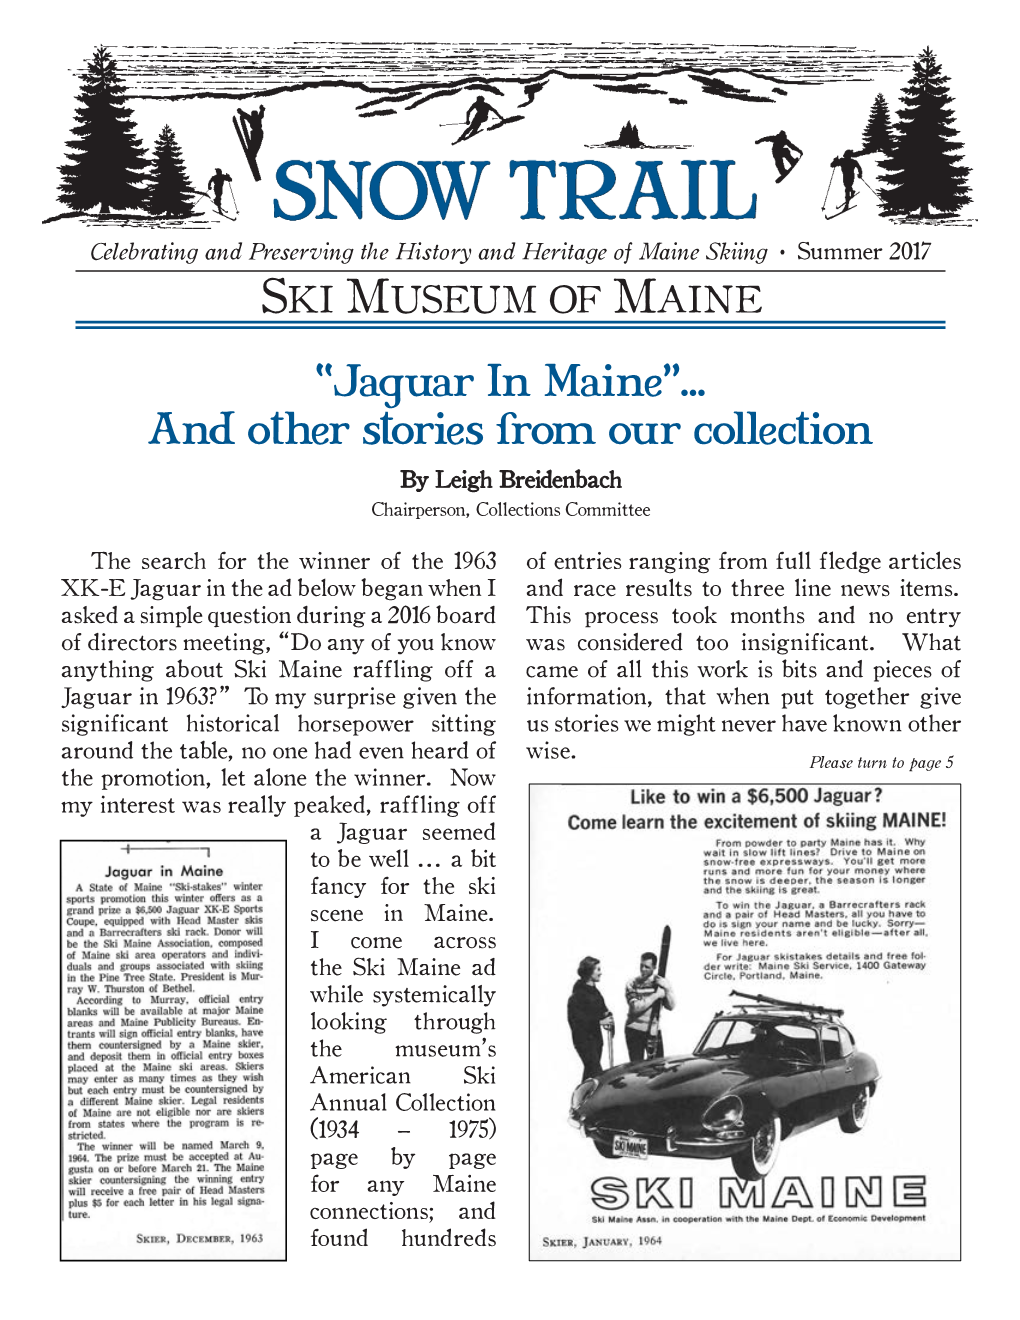 “Jaguar in Maine”... and Other Stories from Our Collection by Leigh Breidenbach Chairperson, Collections Committee